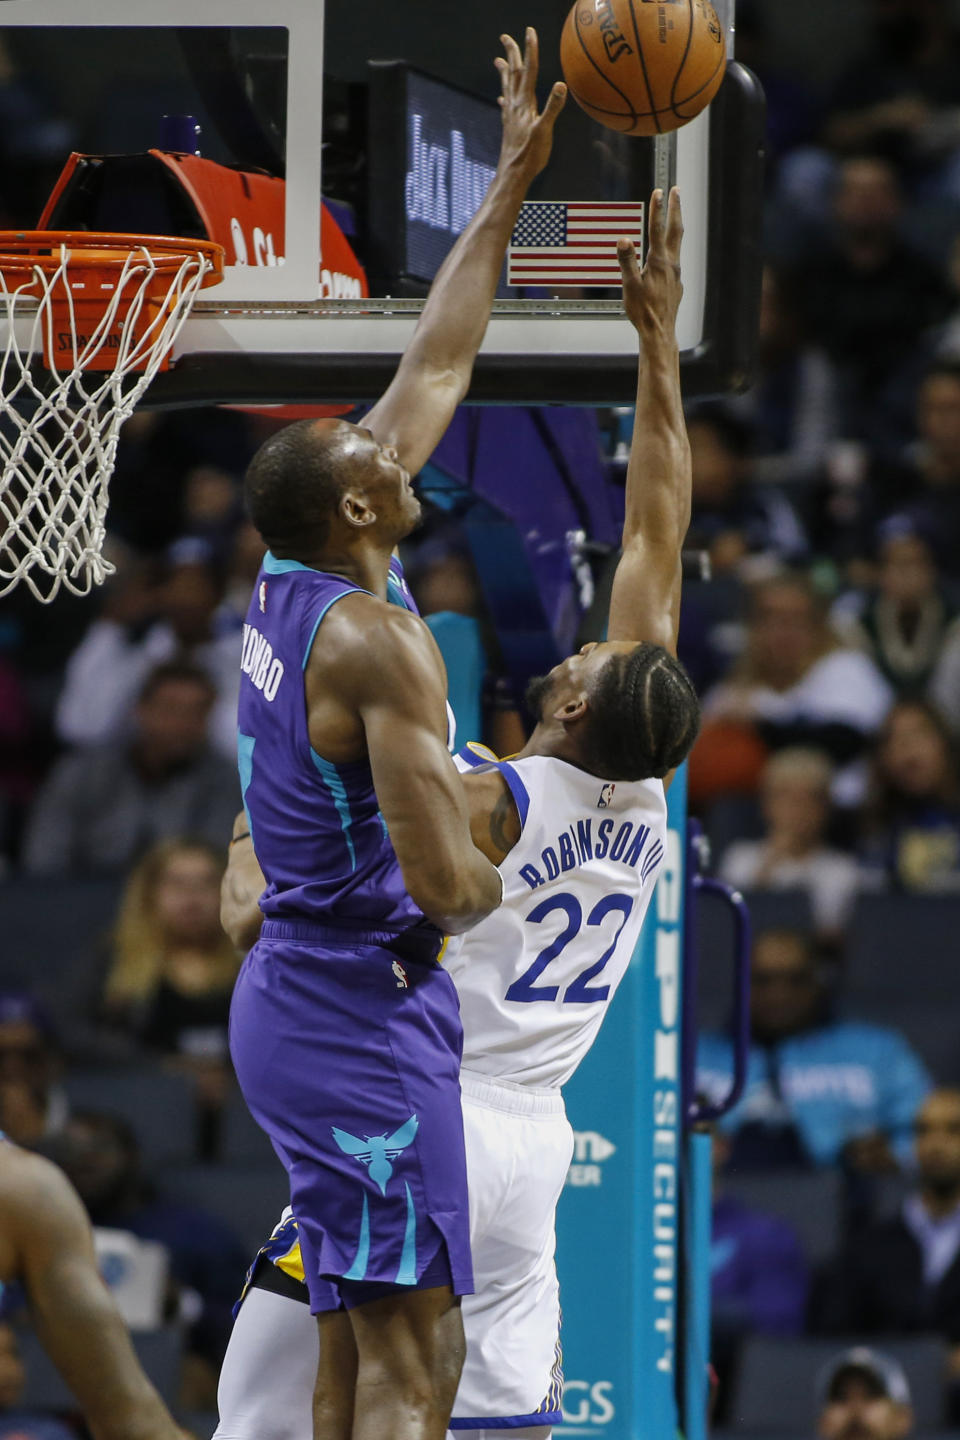 Golden State Warriors forward Glenn Robinson III (22) shoots as Charlotte Hornets center Bismack Biyombo defends during the first half of an NBA basketball game in Charlotte, N.C., Wednesday, Dec. 4, 2019. (AP Photo/Nell Redmond)